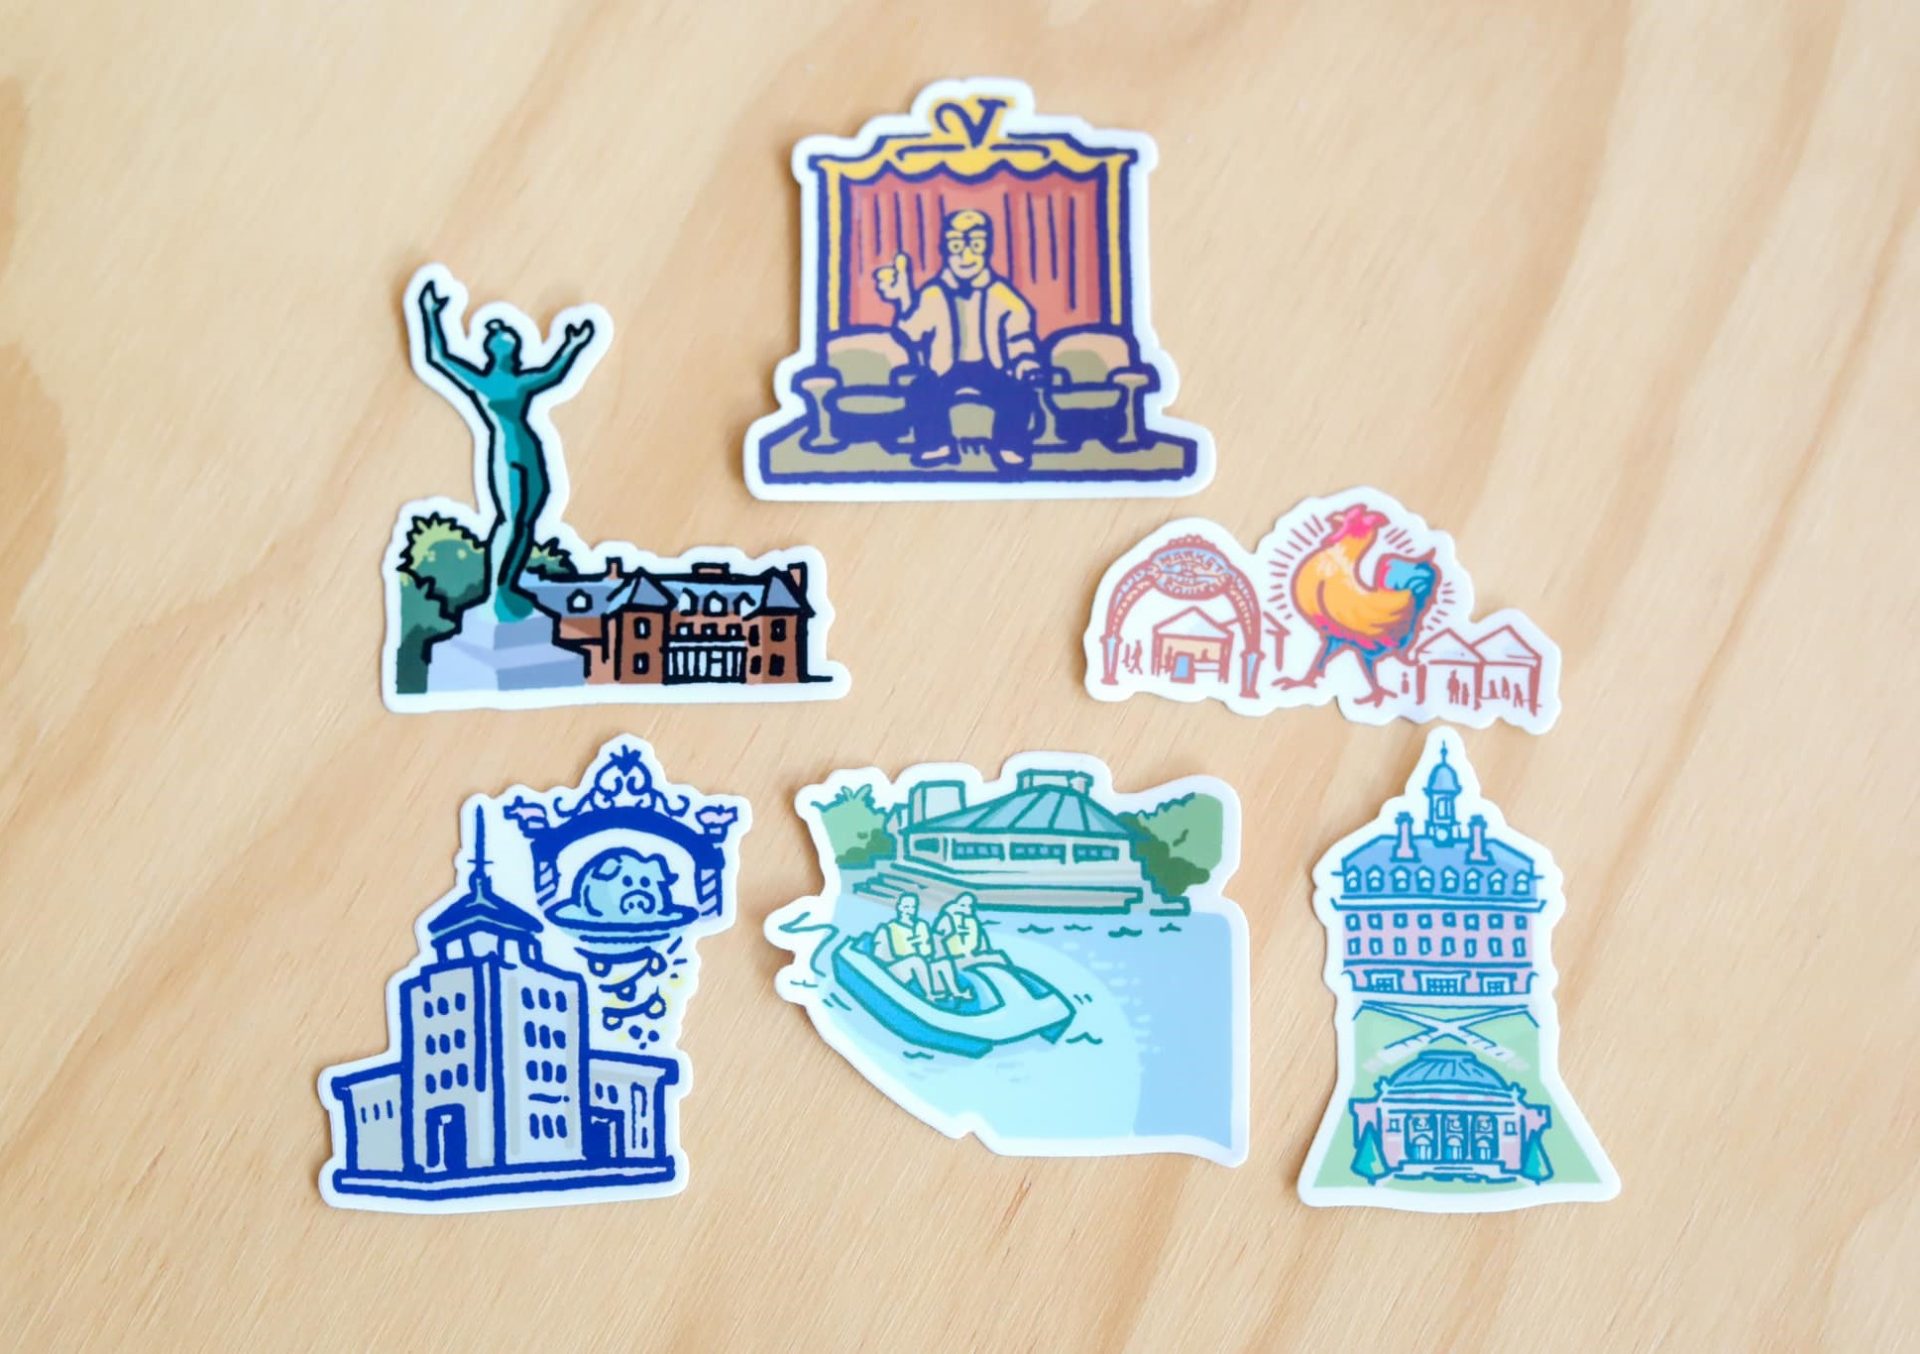 A collection of five stickers with artwork depicting Champaign-Urbana related things. The are arranged in a cluster on a light wood surface.